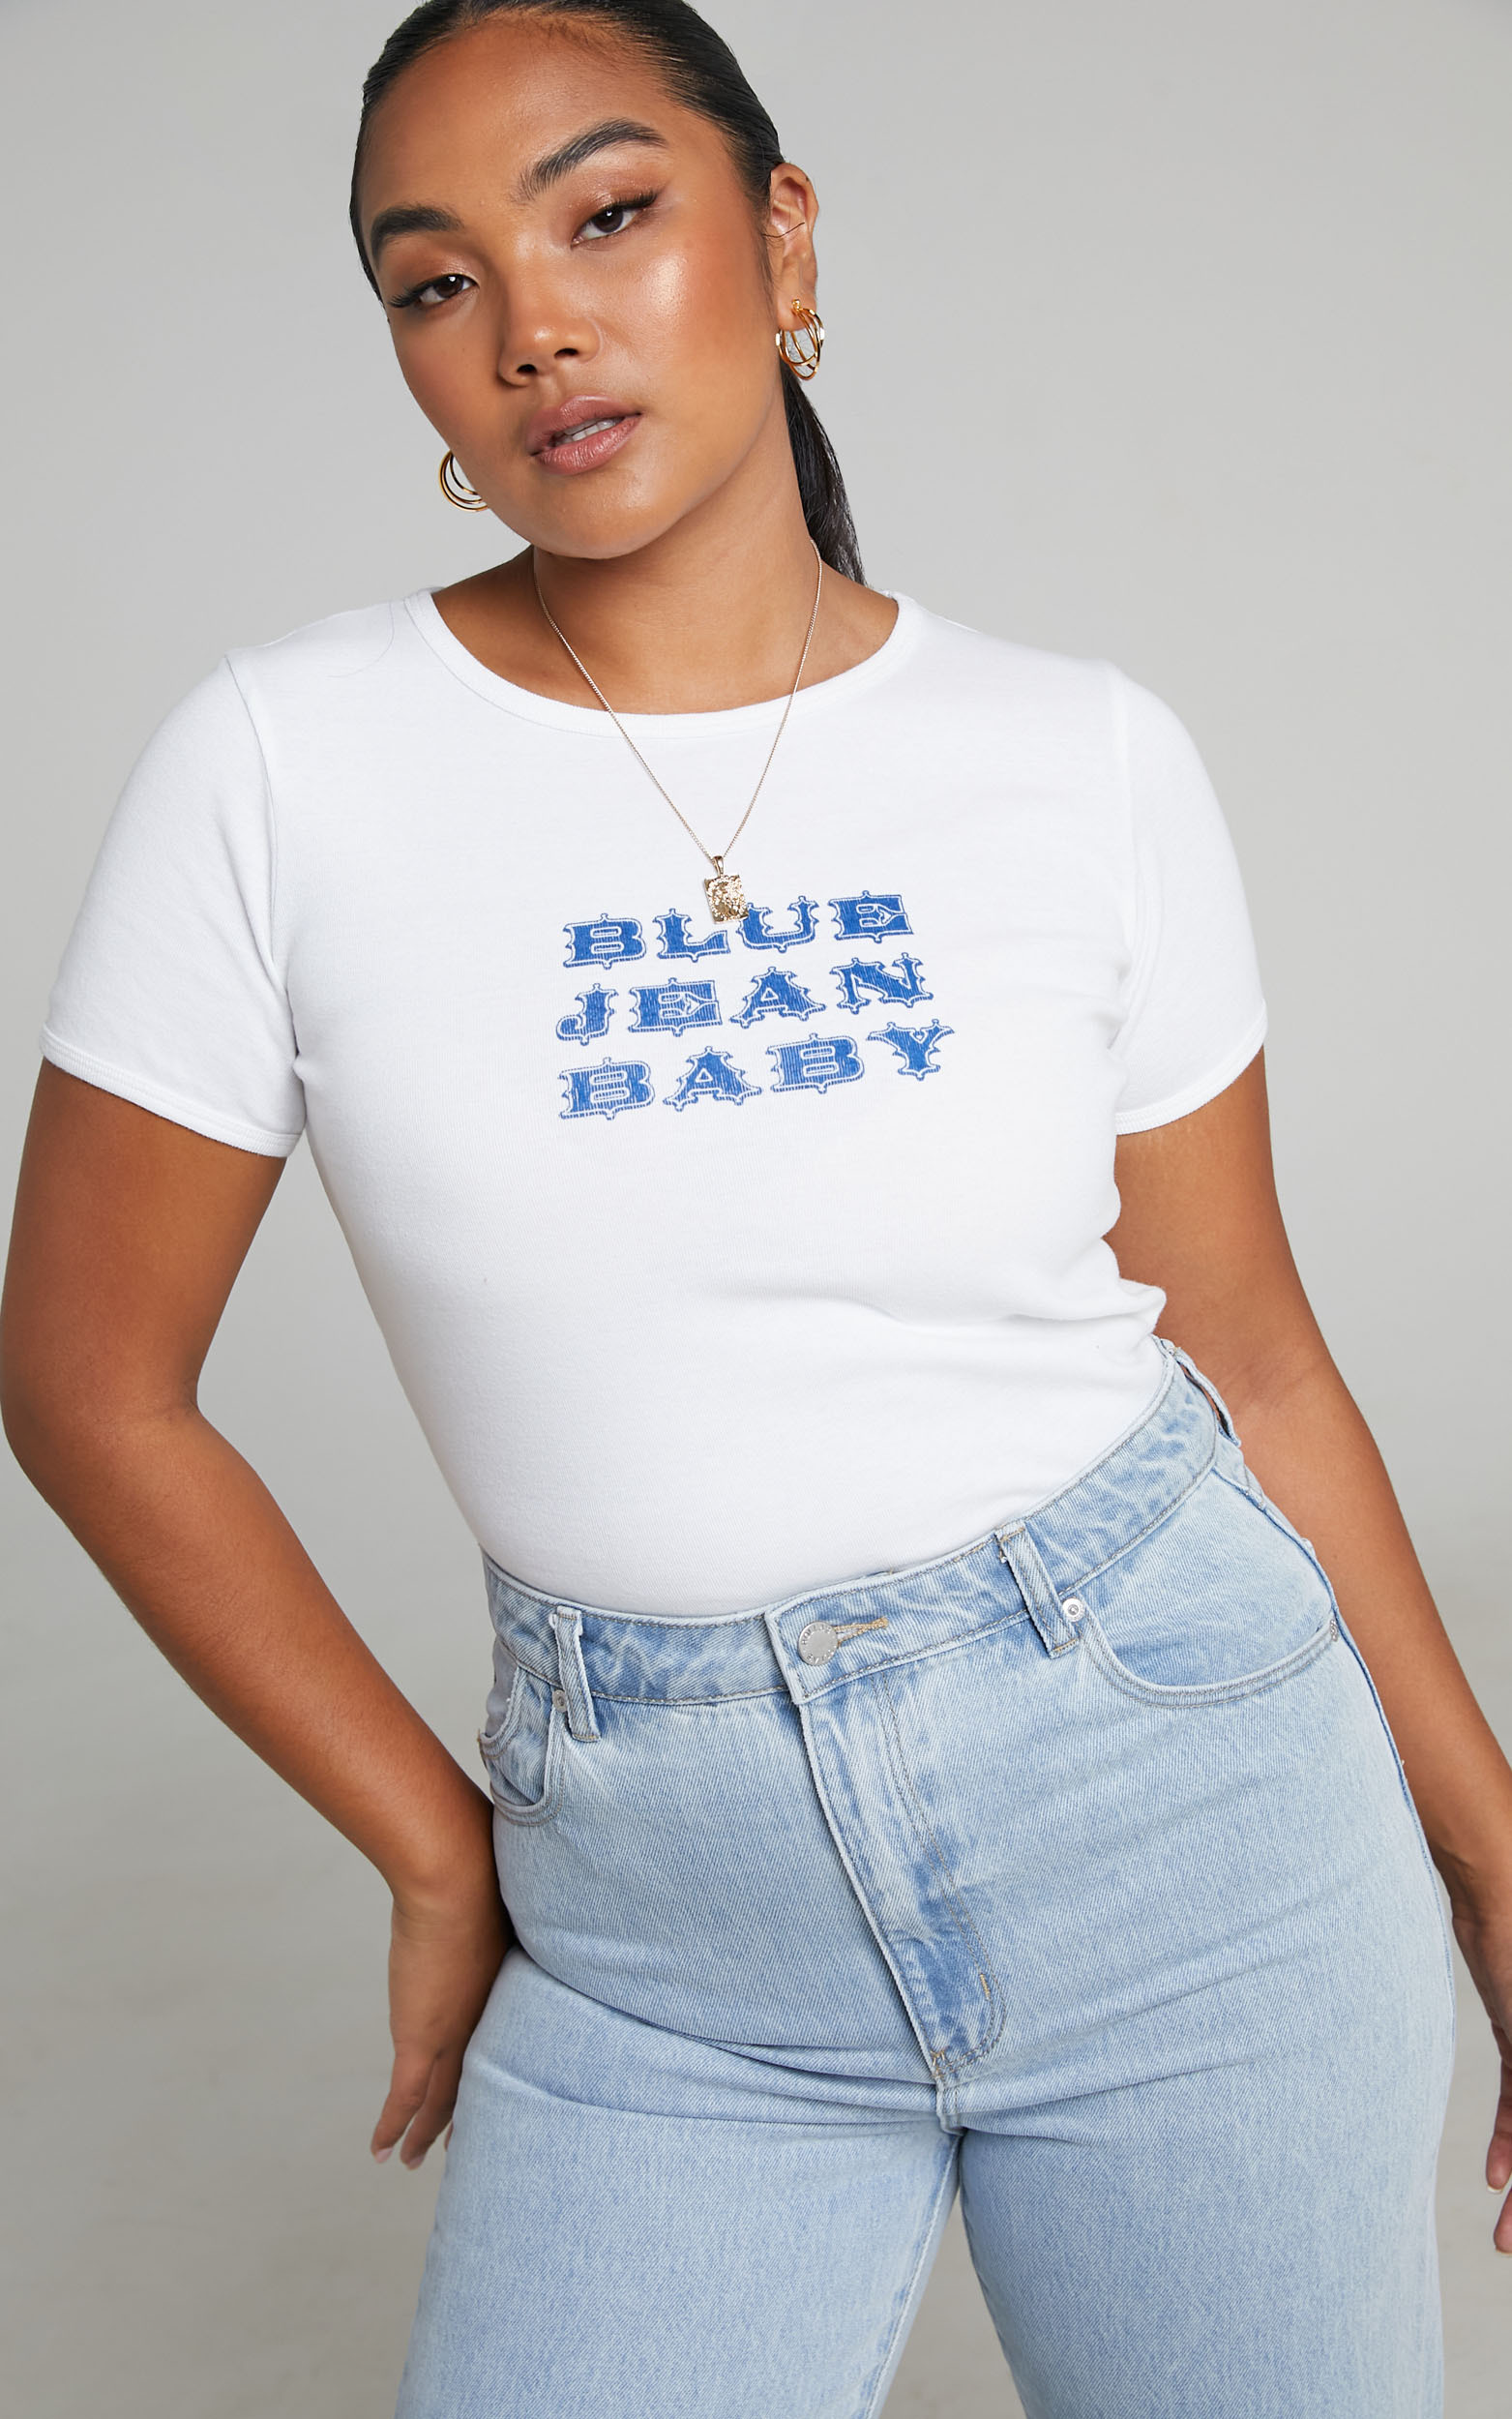 Rolla's - Blue Jean Tight Rib Tee in White - 06, WHT1, hi-res image number null